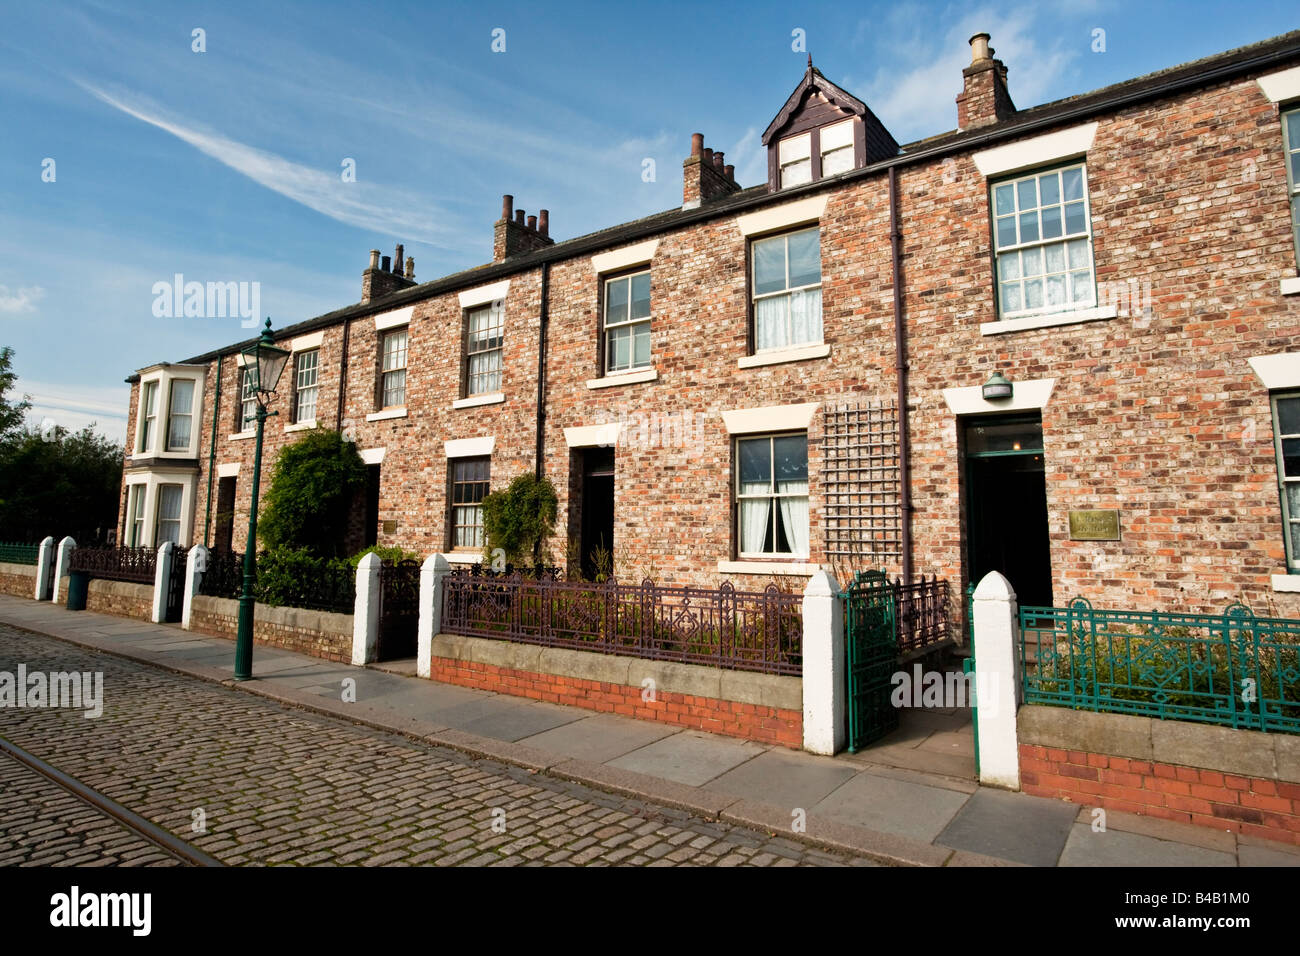 A recreation of a row of Edwardian terraced housing in the open air museum of Beamish in County Durham, England Stock Photo